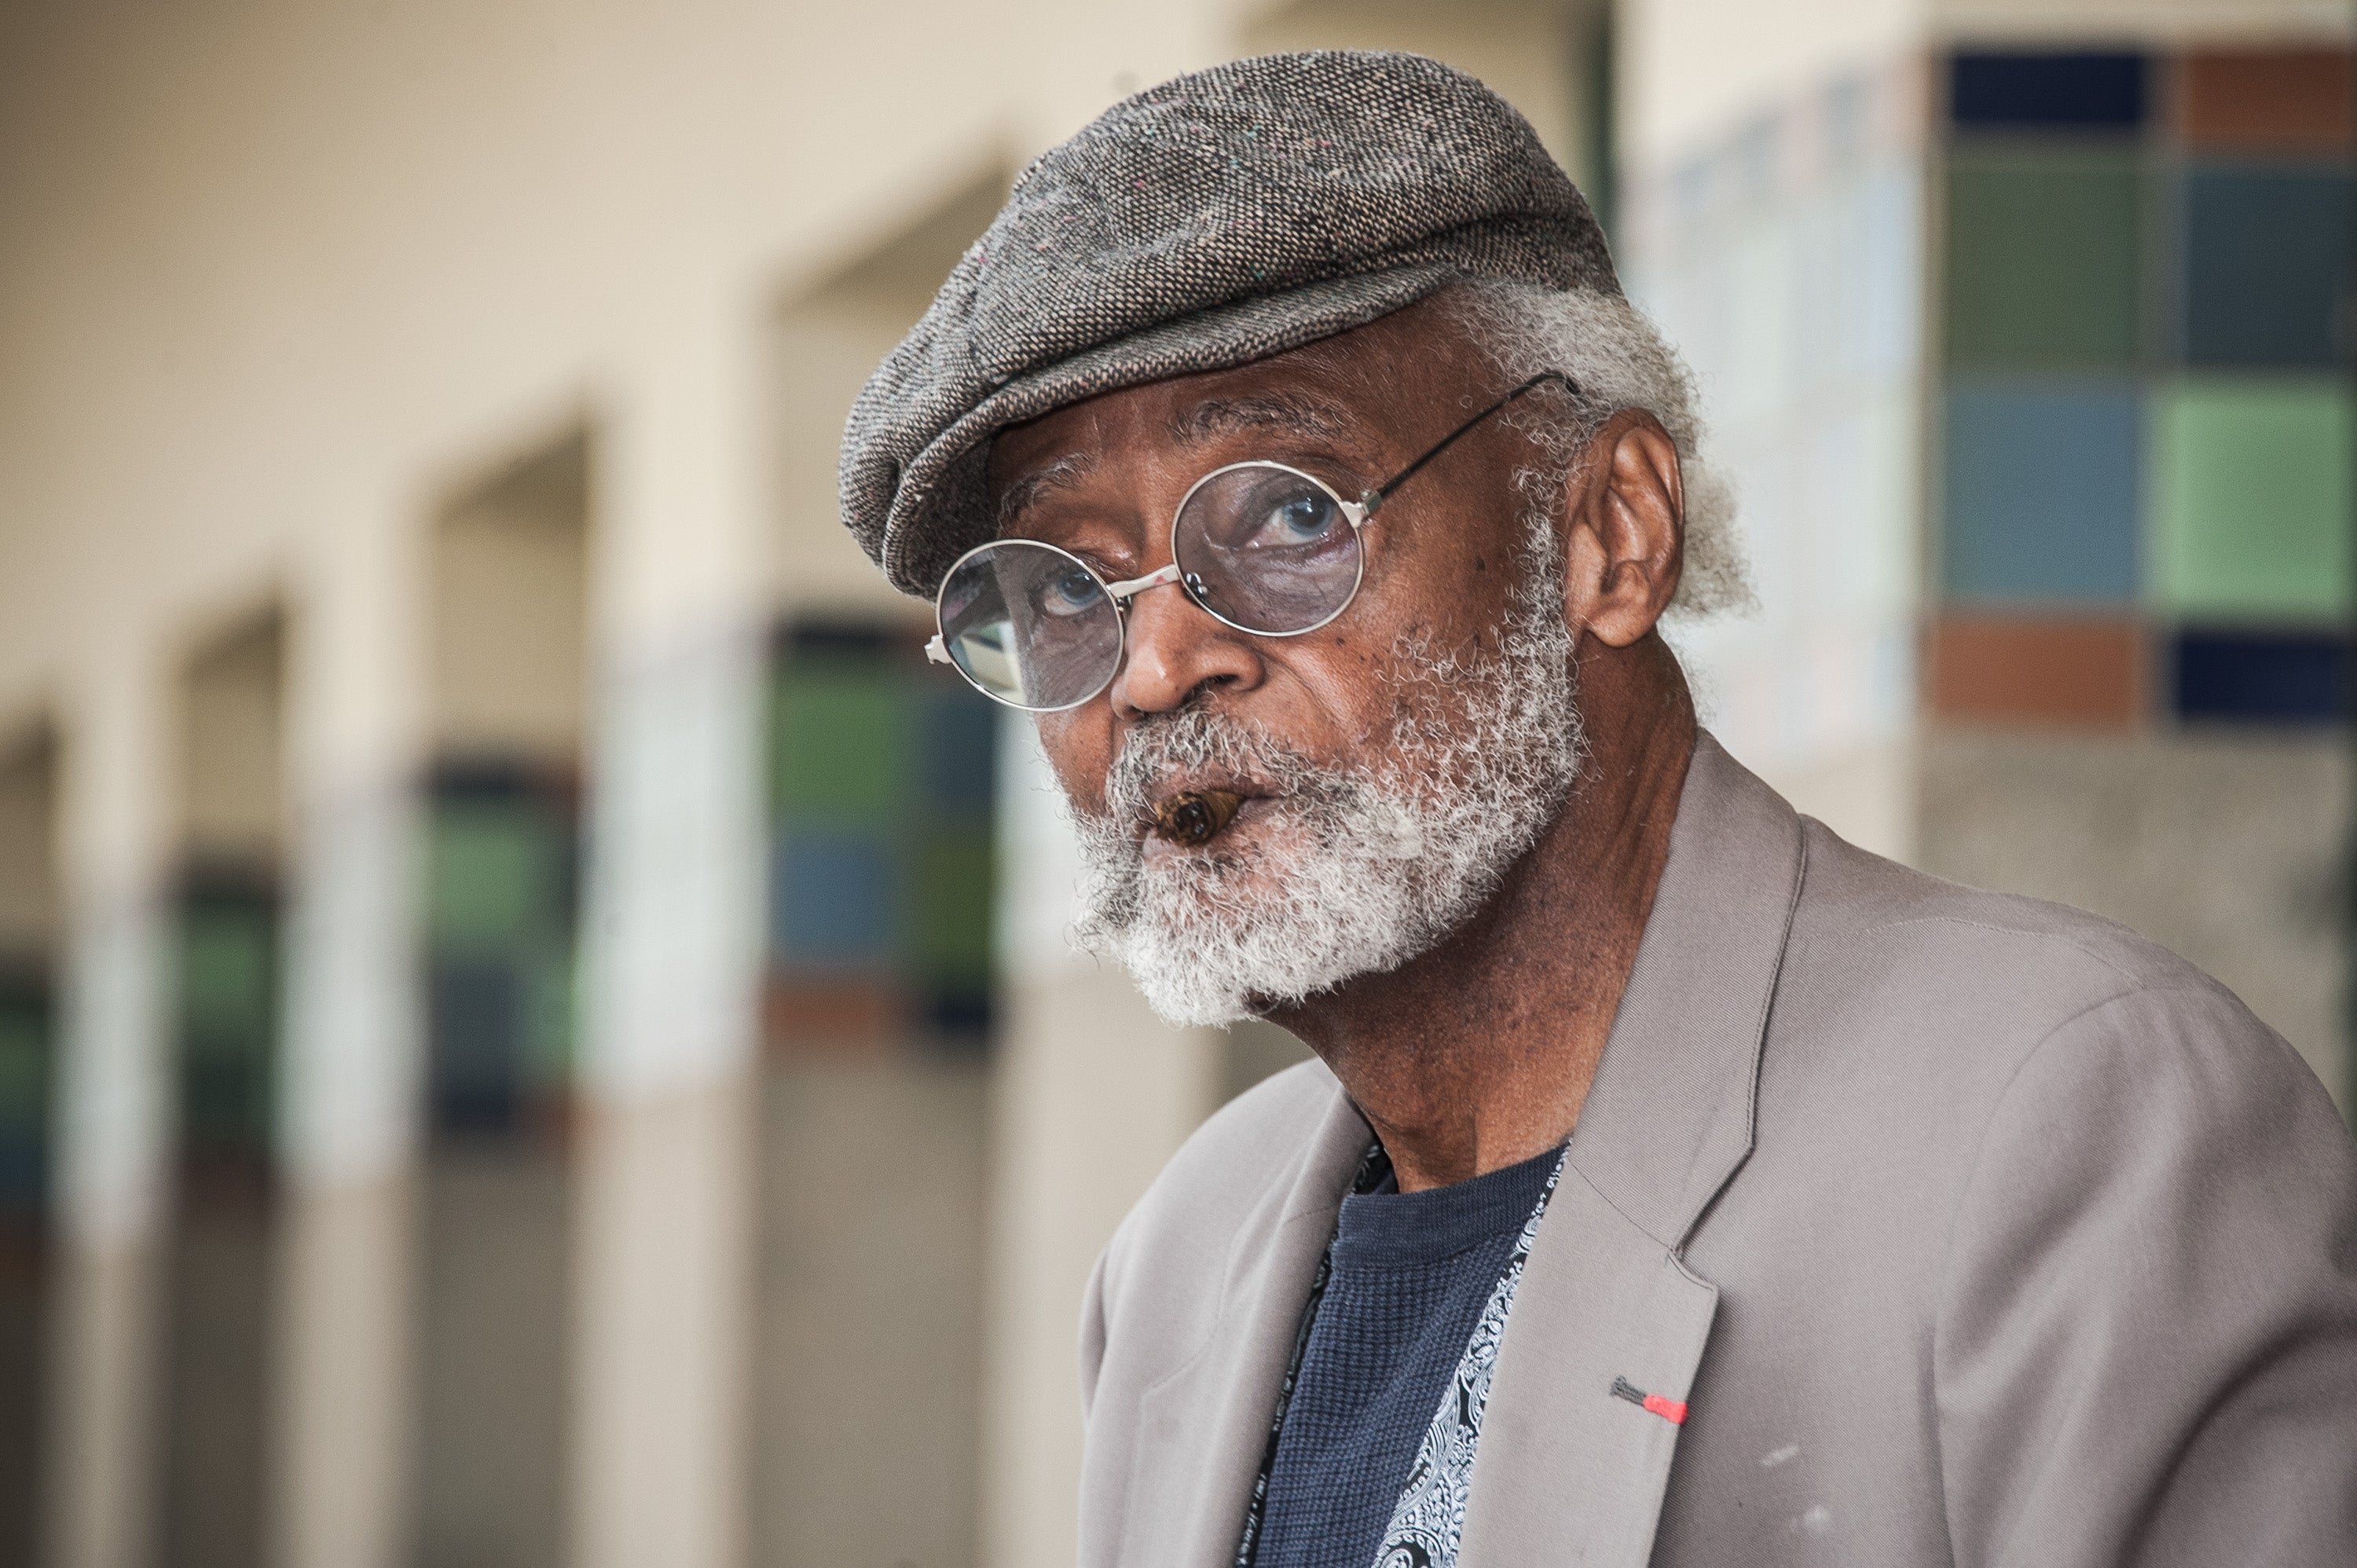 File: Melvin van Peebles at the 38th Deauville American Film Festival in 2012